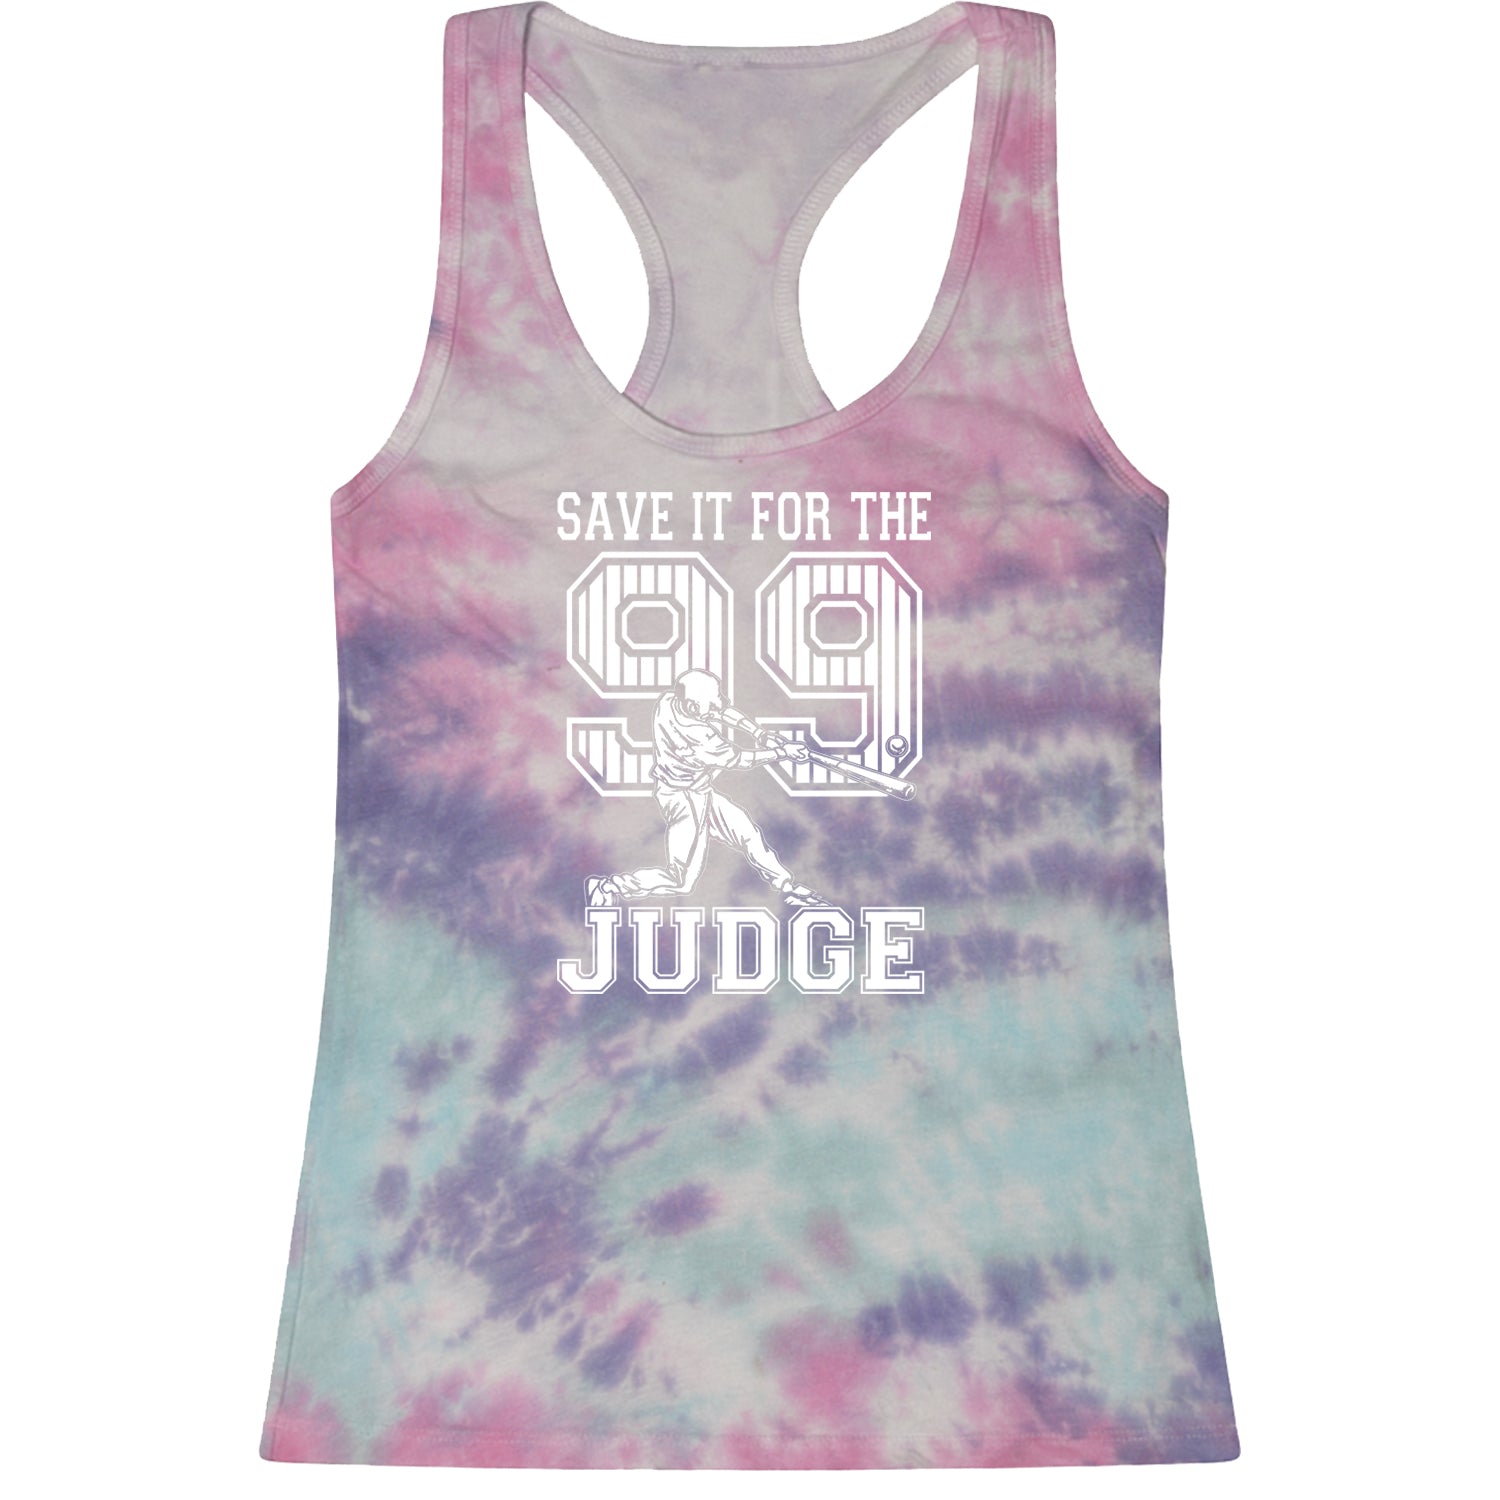 Save It For The Judge 99 Racerback Tank Top for Women 99, aaron, all, for, judge, new, number, rise, the, yankees, york by Expression Tees